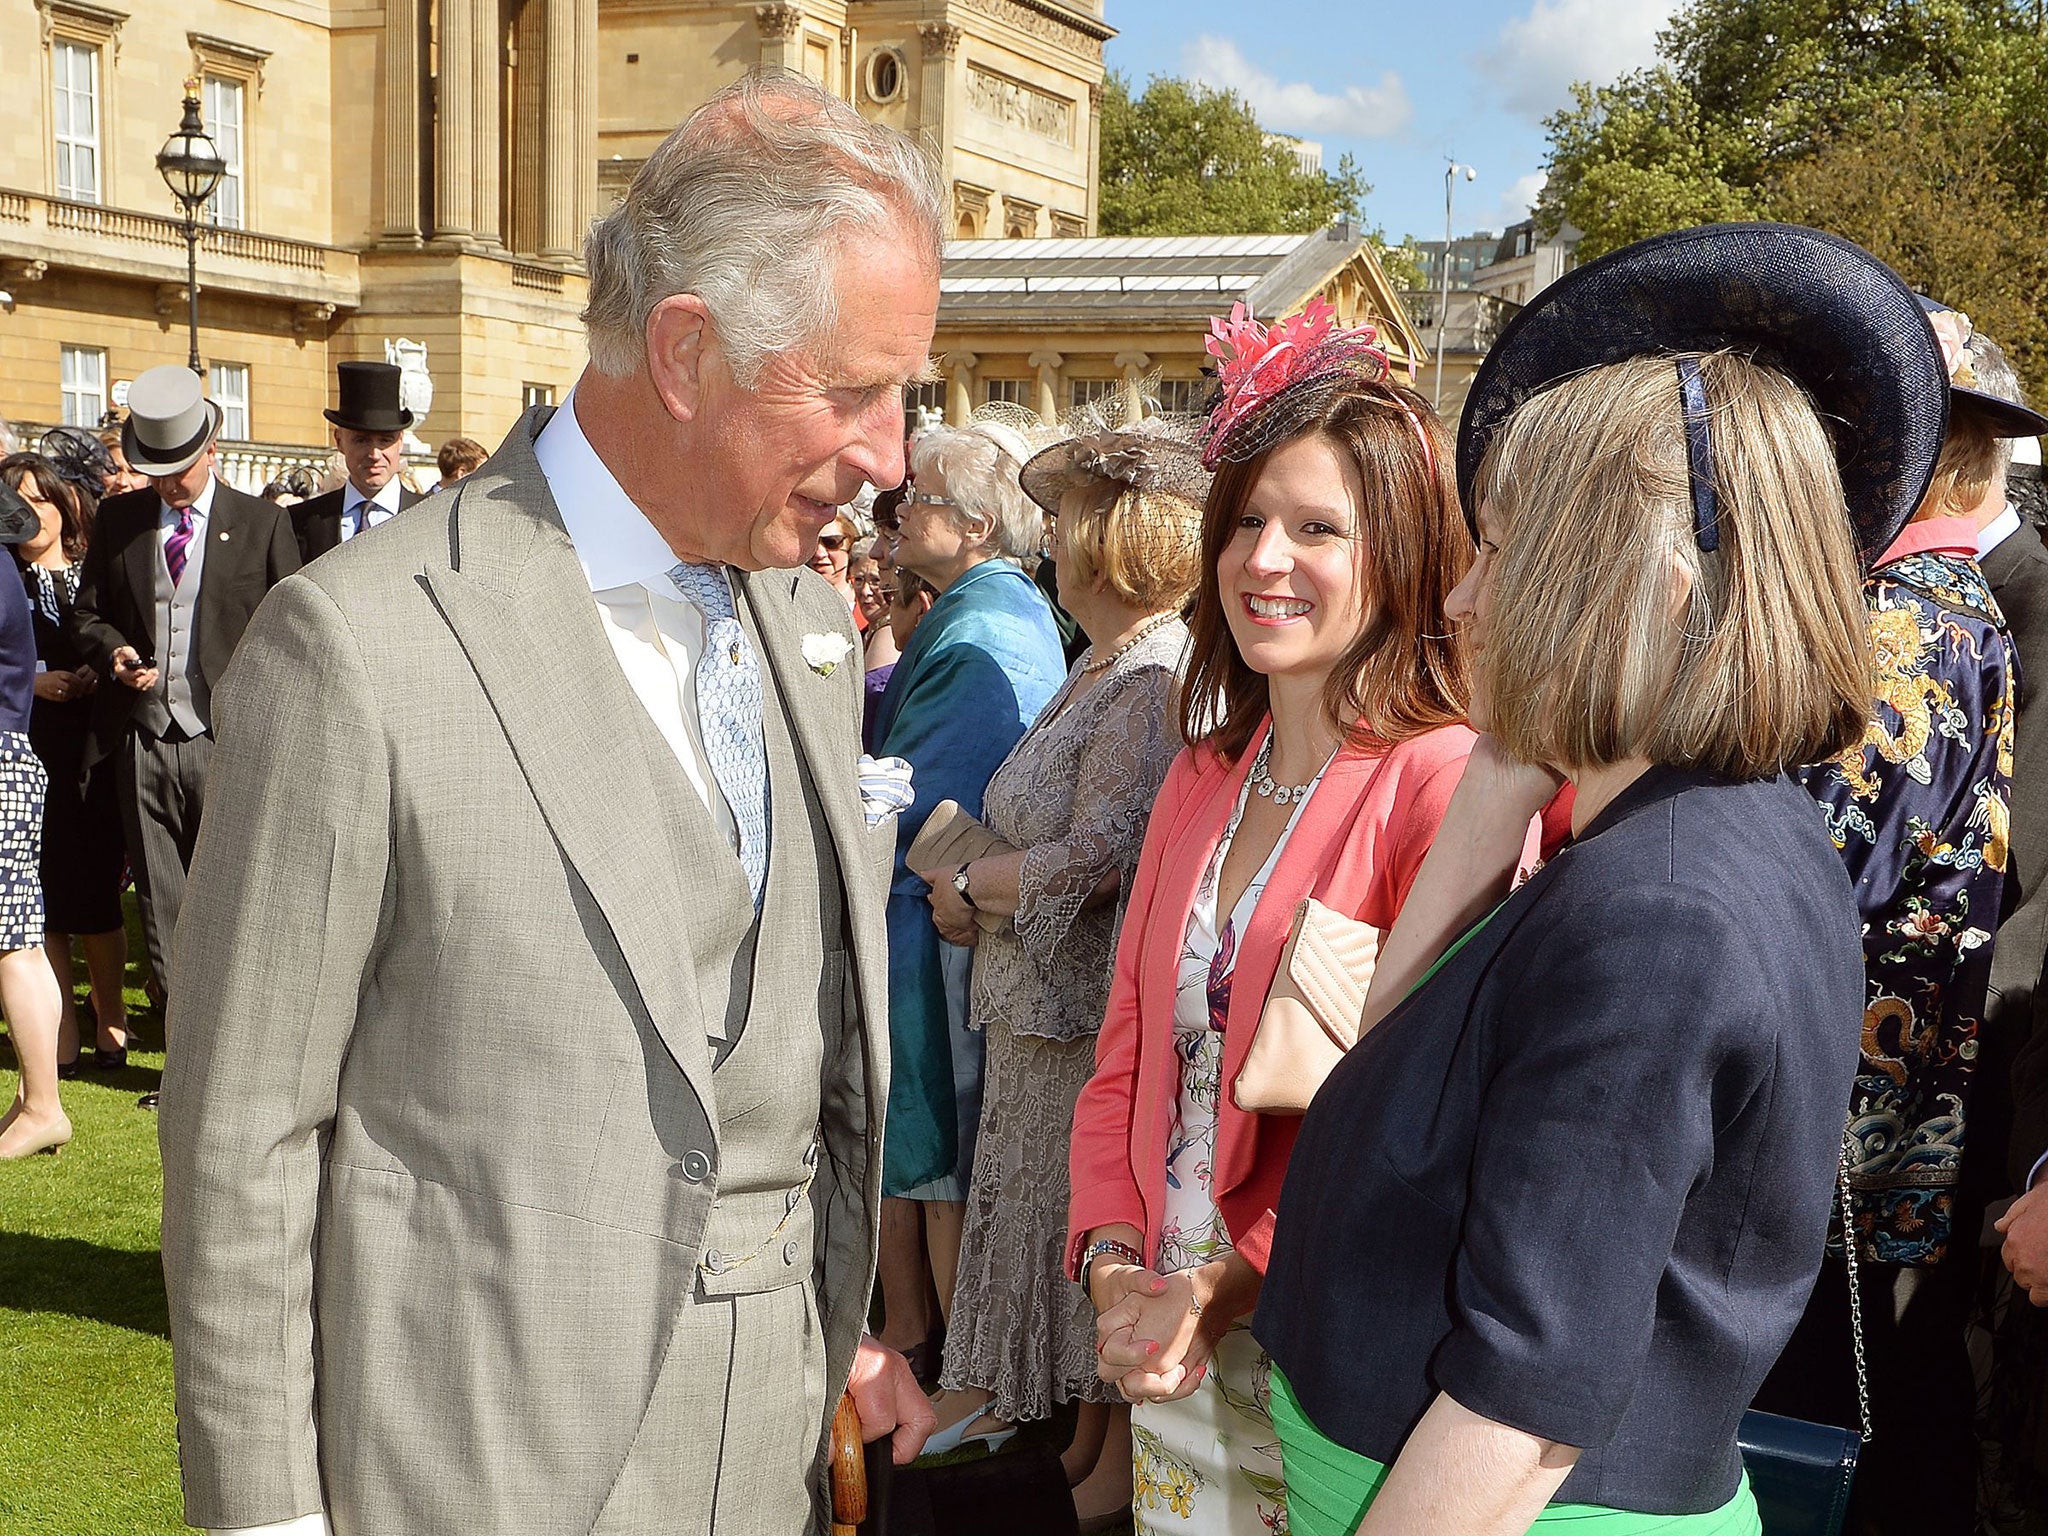 Prince Charles, at a garden party in London, may have damaged the Royal Family’s reputation for neutrality by sending the letters